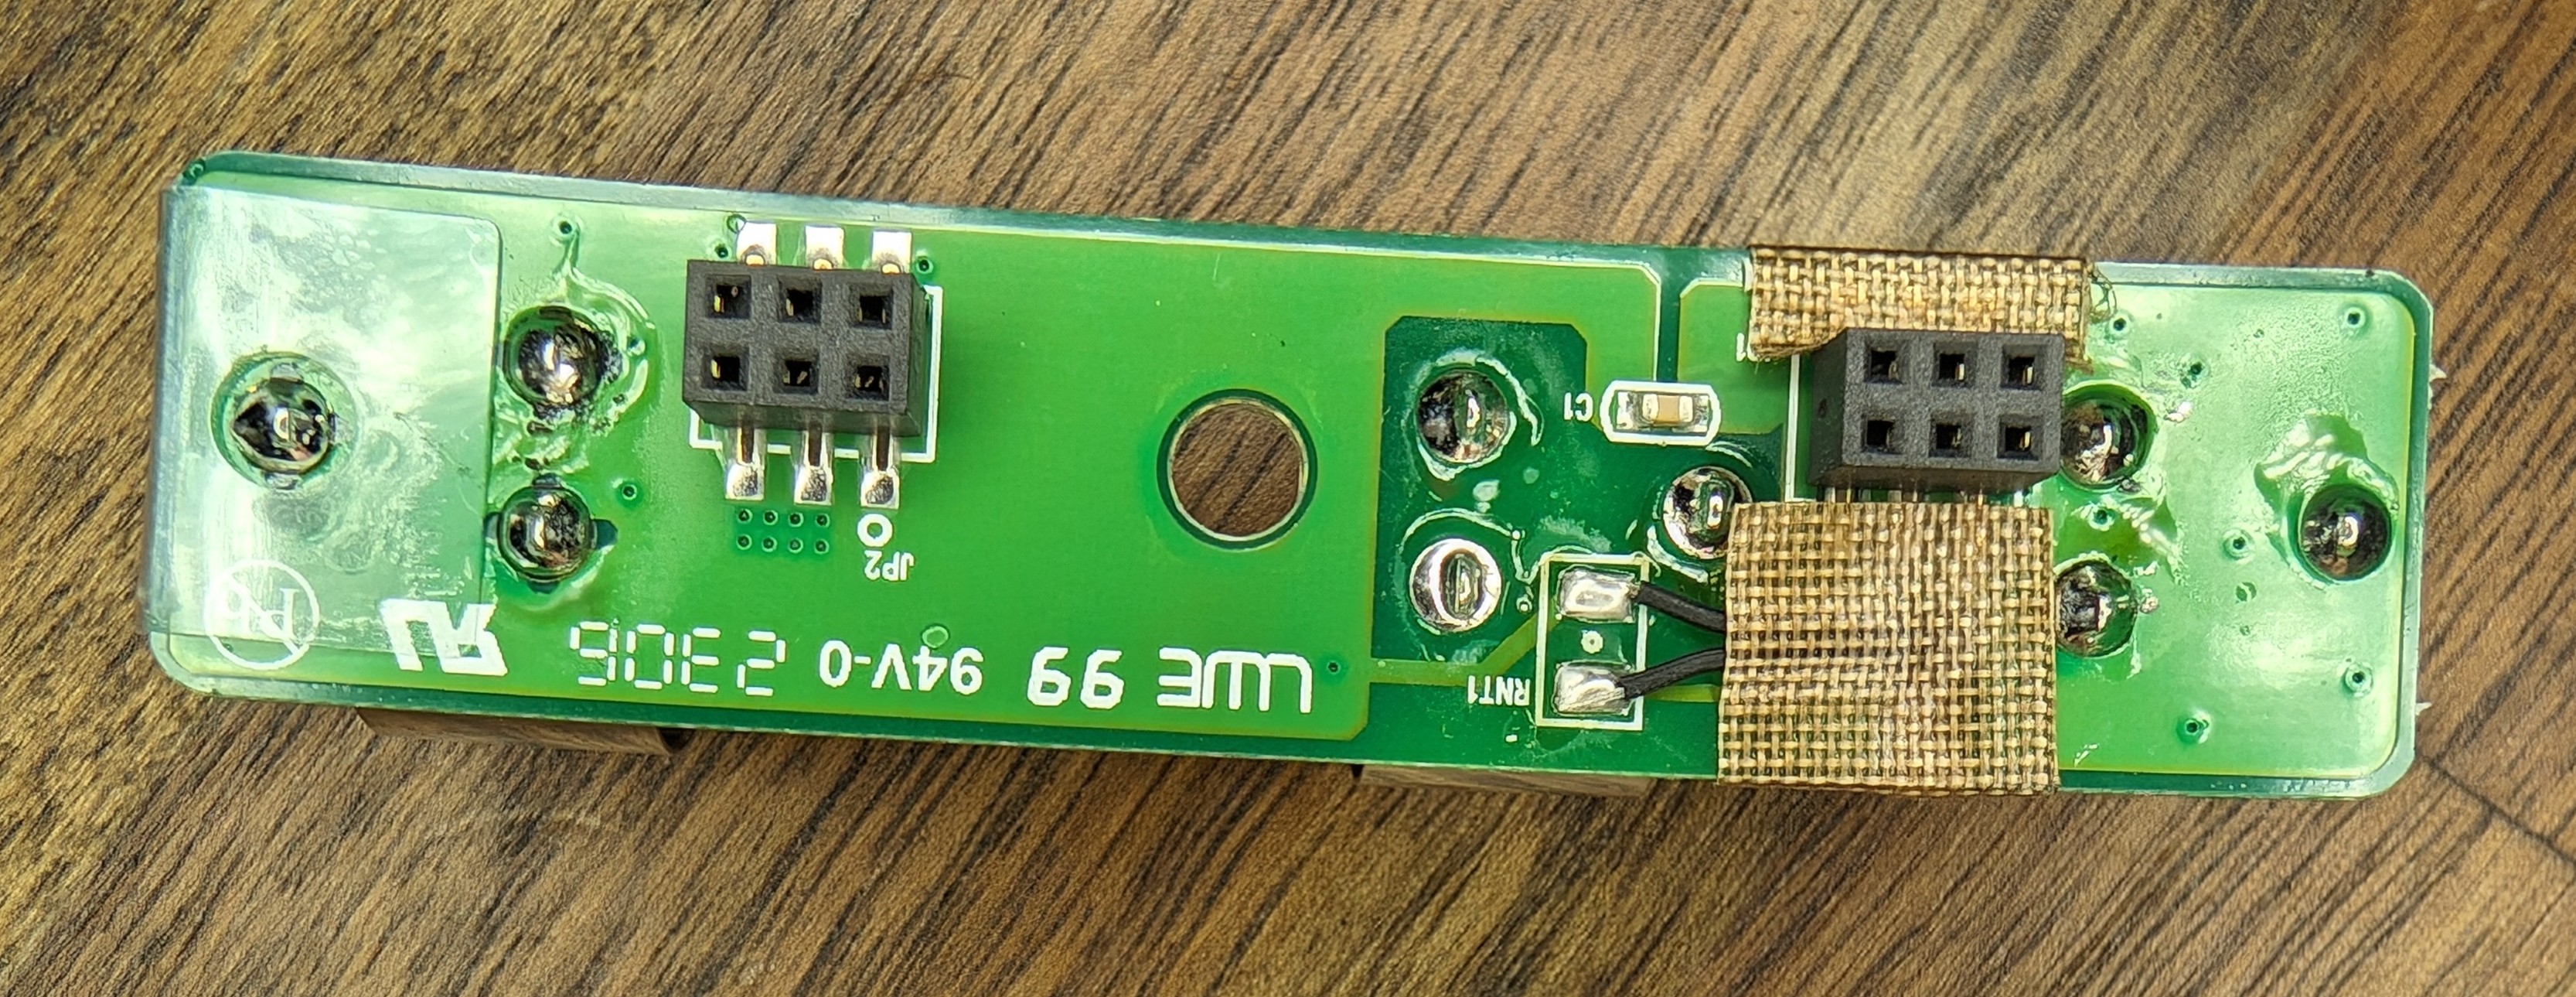 Rear of the battery interface PCB.